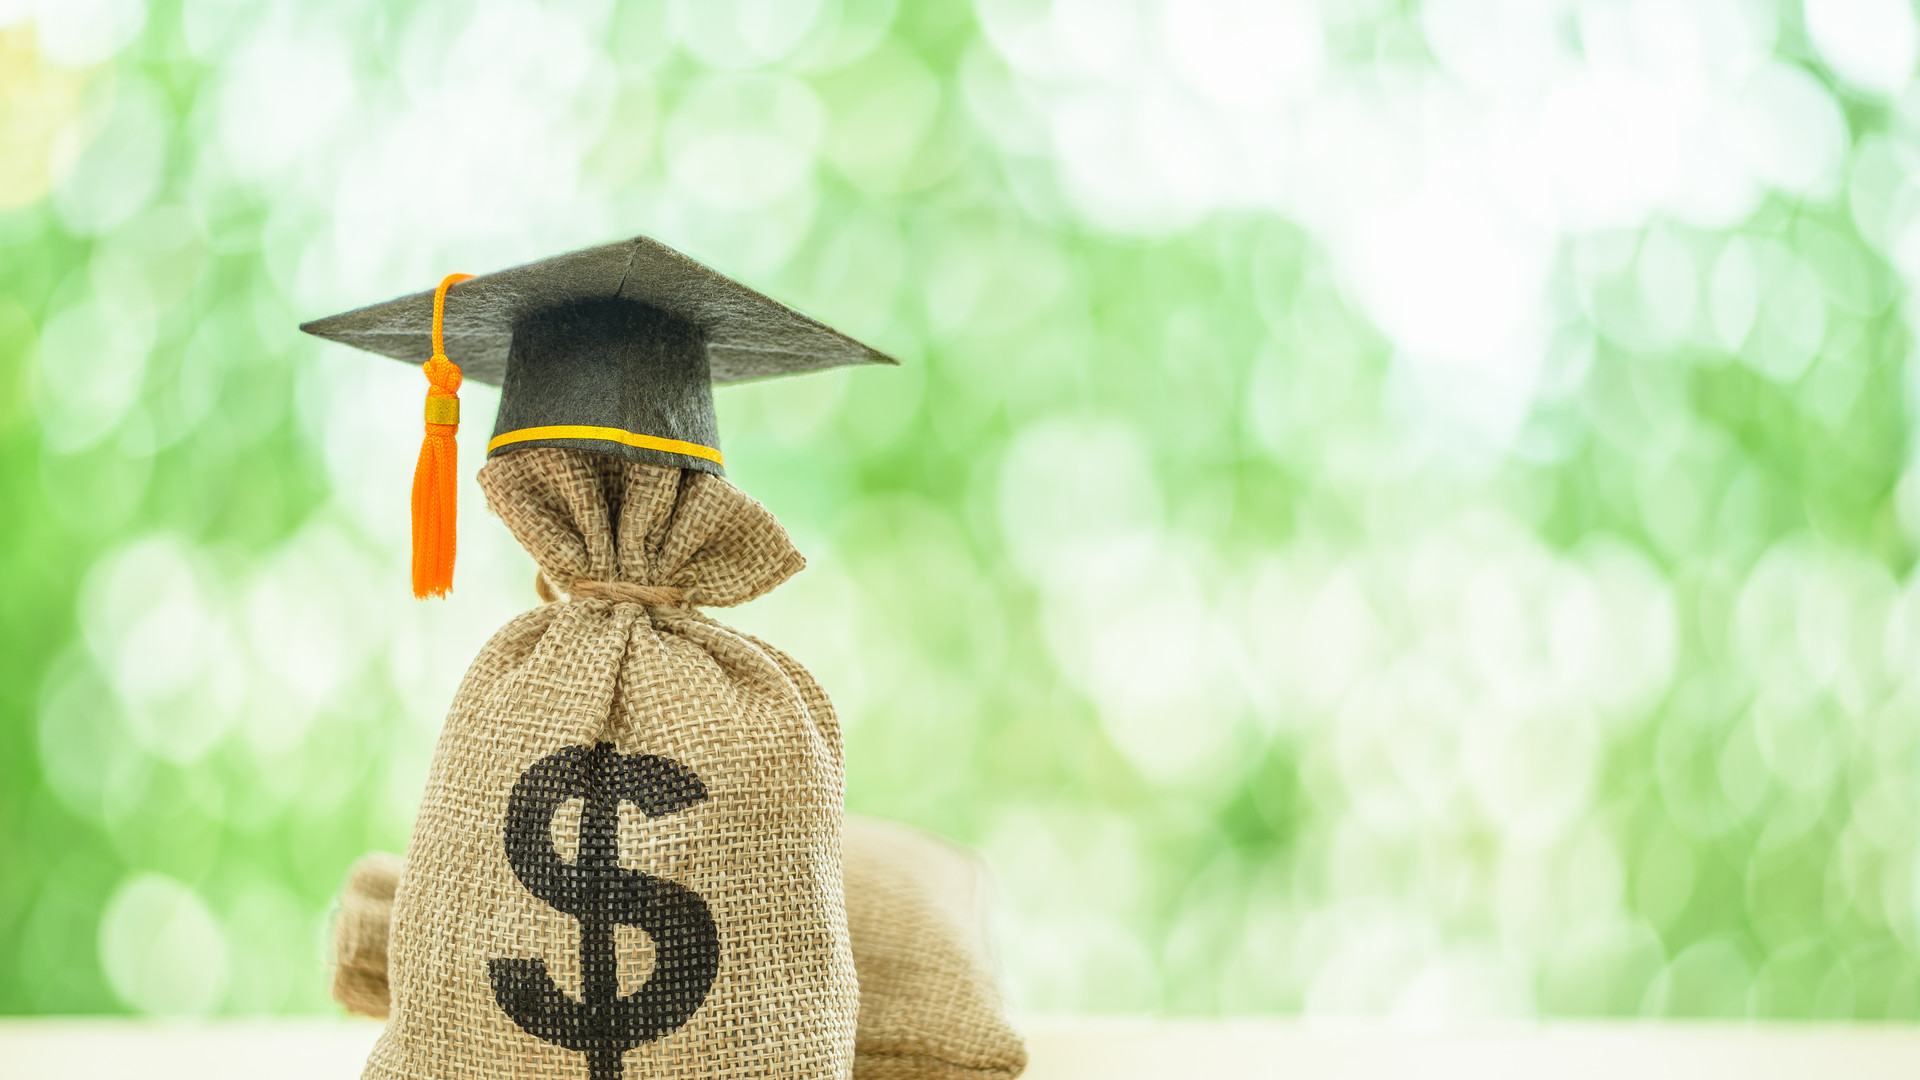 Education or student loan, financial aid and scholarship concept : Mortarboard or graduation cap on top of a US dollar cash bag. Depicting financial assistance for a student's tuition and other costs.